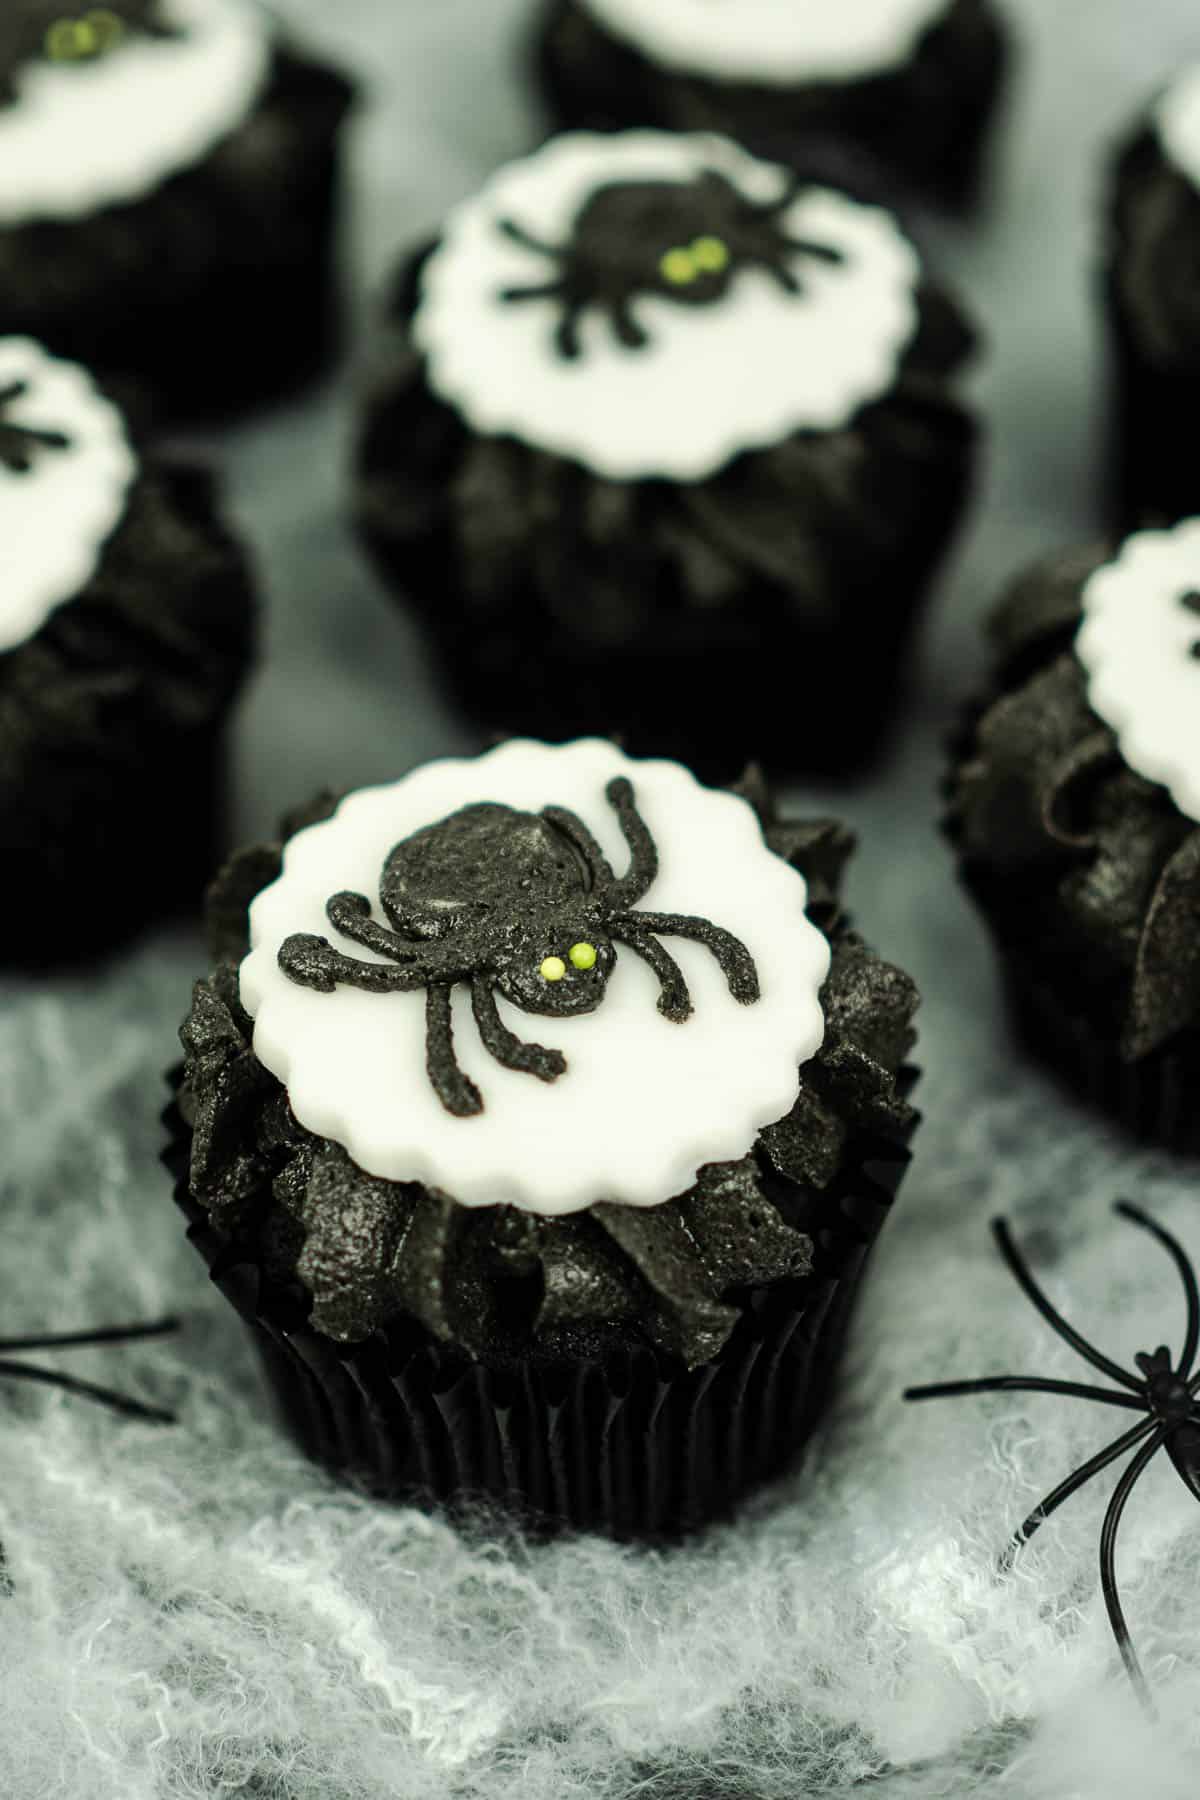 Chocolate cupcakes in black cupcake liners, decorated with black frosting, white fondant cut out and black buttercream spiders.